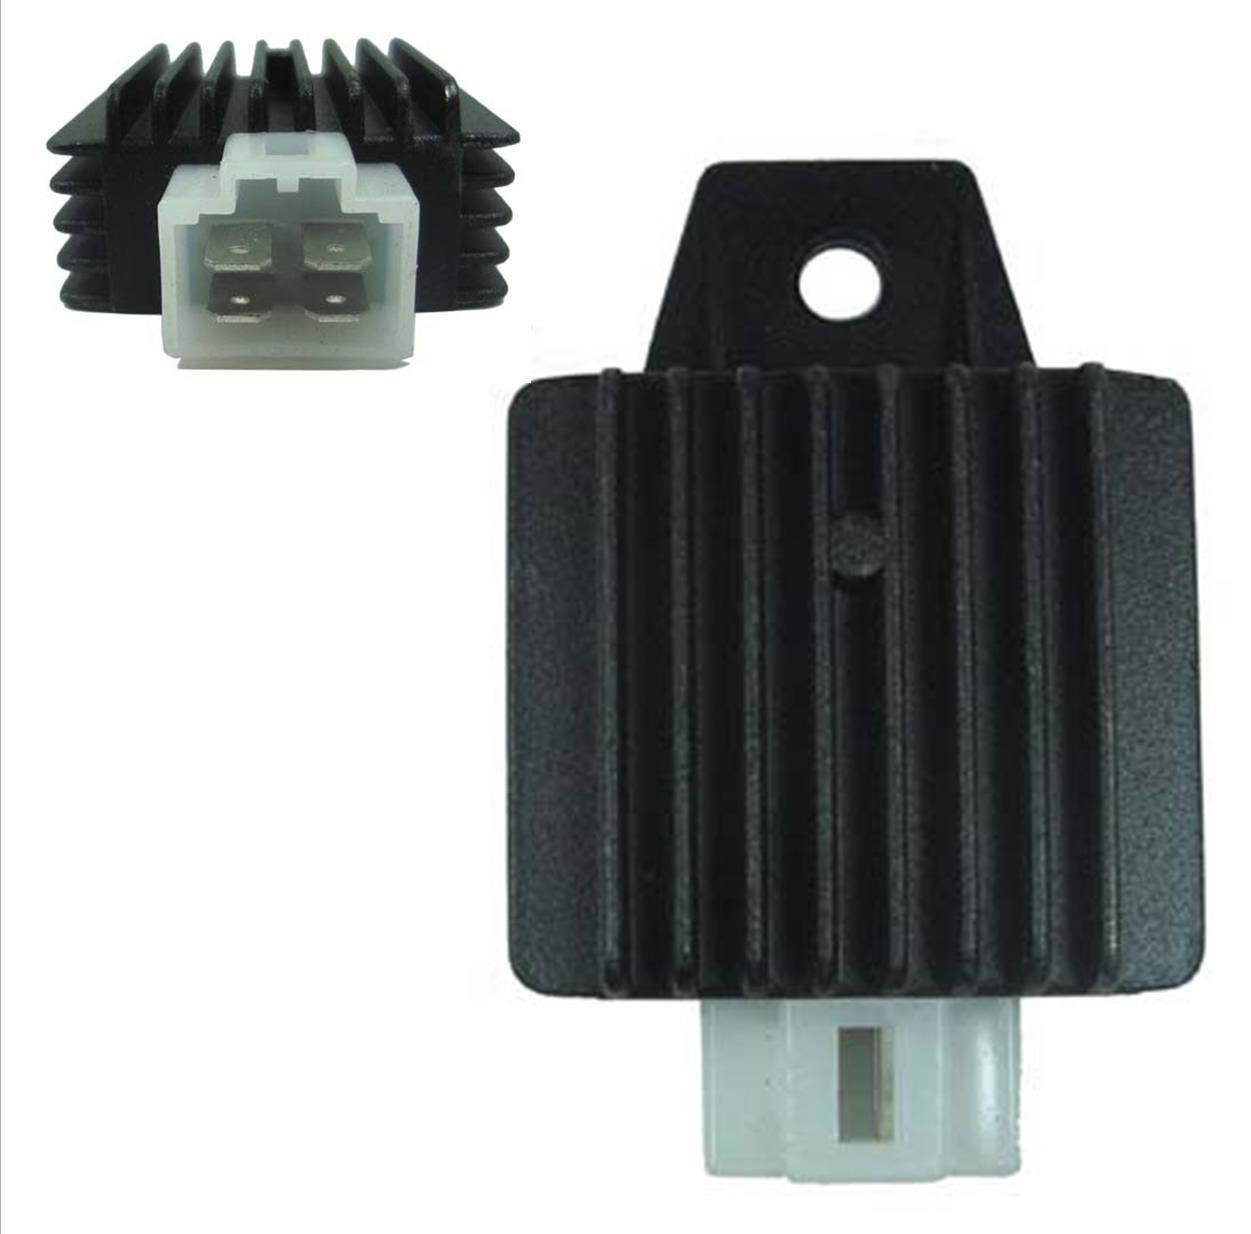 Voltage Regulator Rectifier 49-150cc Chinese ATV, Scooters 4 Pins in 4 Pin Jack 49x43